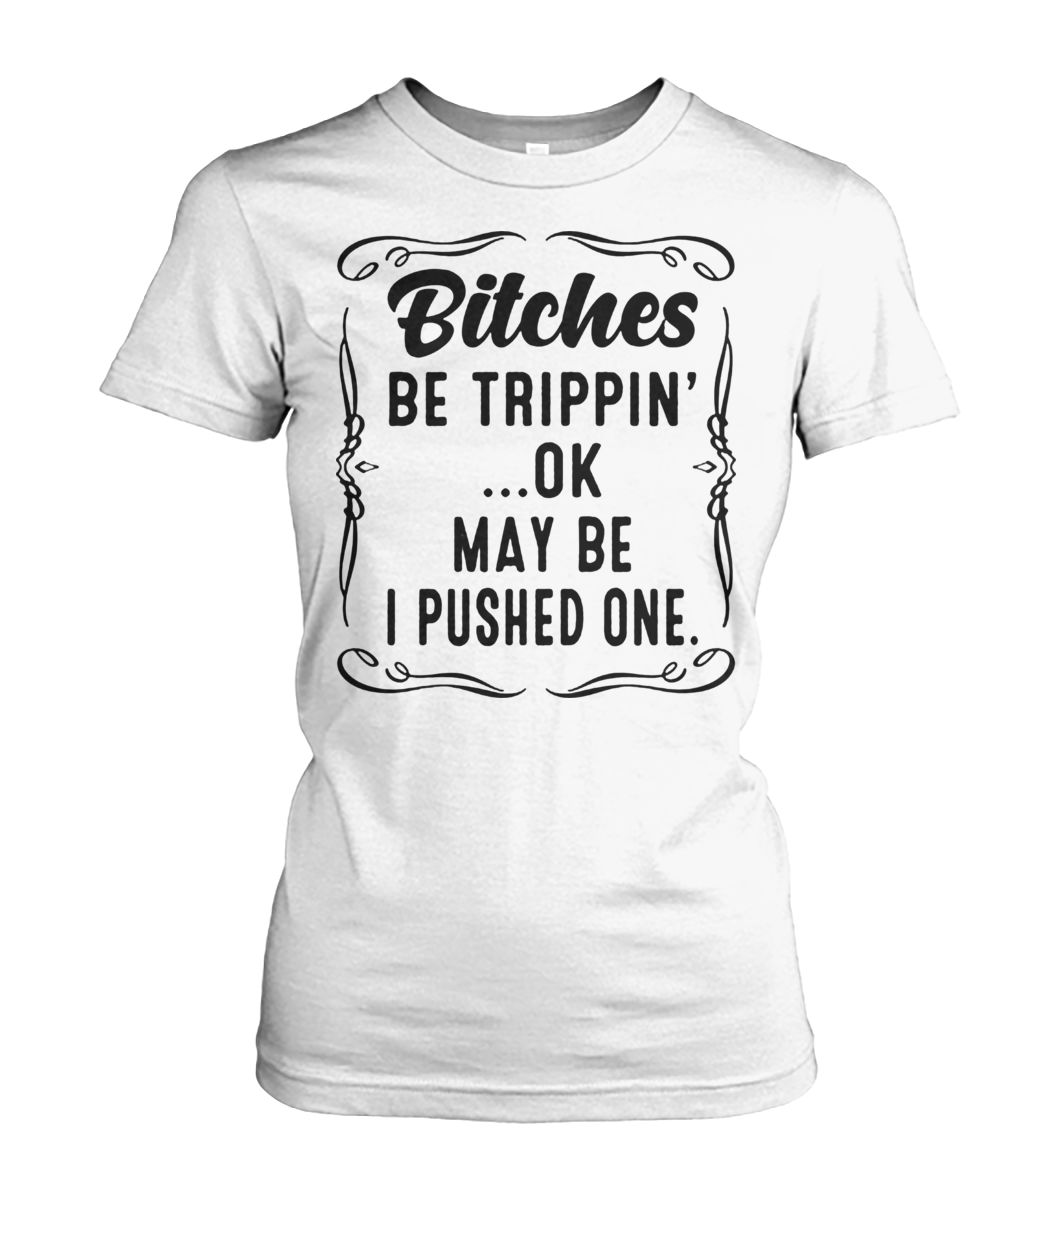 Bitches be trippin' maybe I pushed one women's crew tee